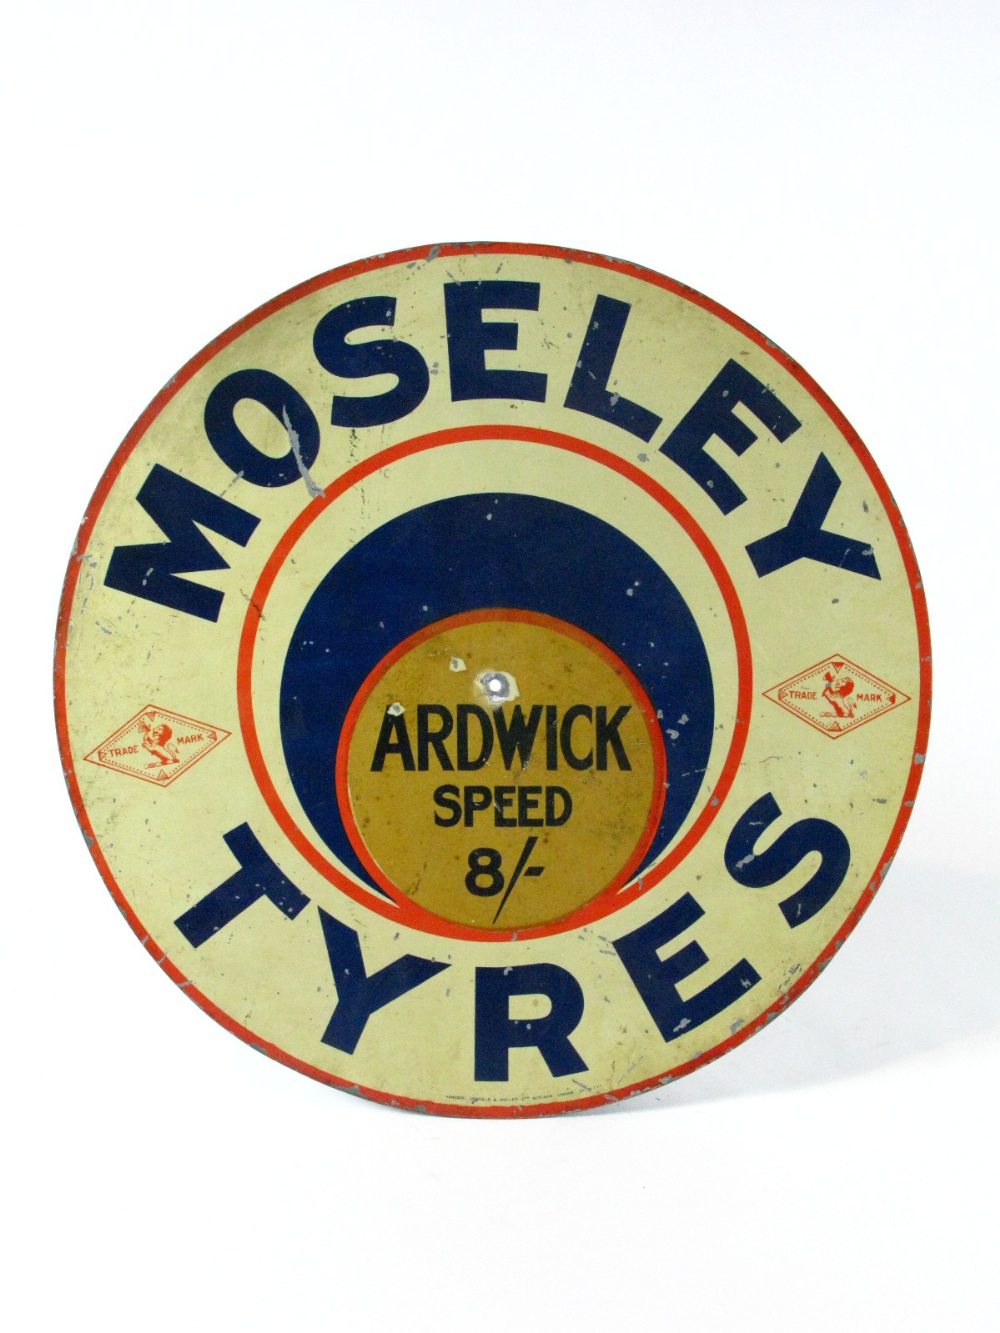 *Moseley Tyres. A circular, transfer-printed on tin, wall-mounted advertisement (1)